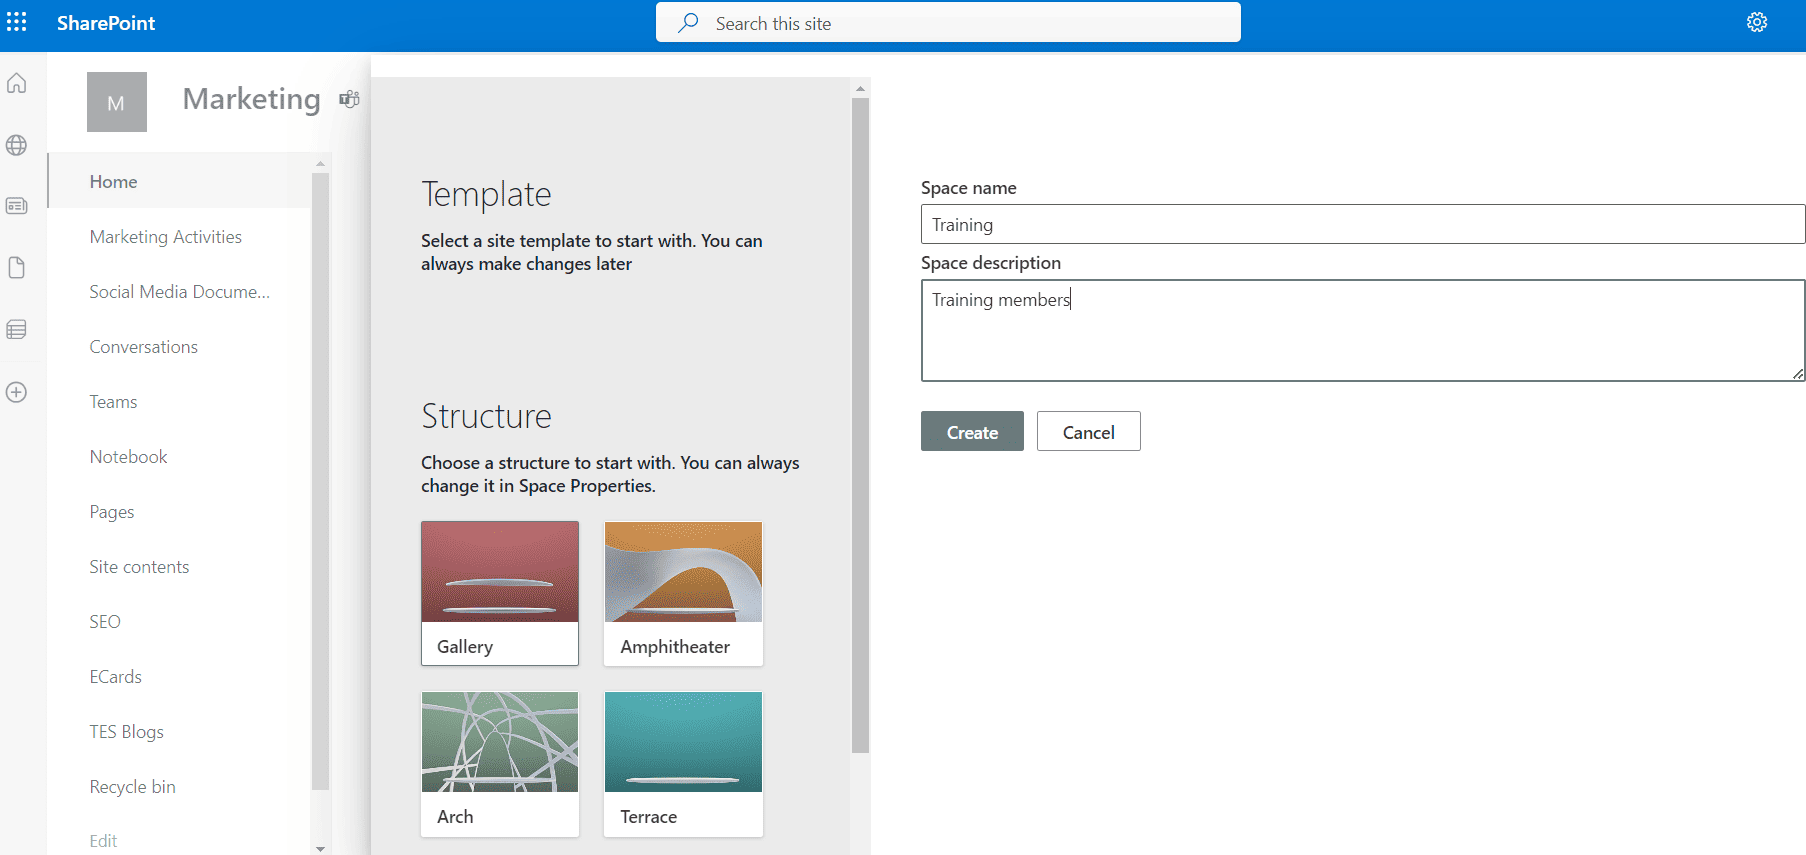 Templates_Sharepoint spaces